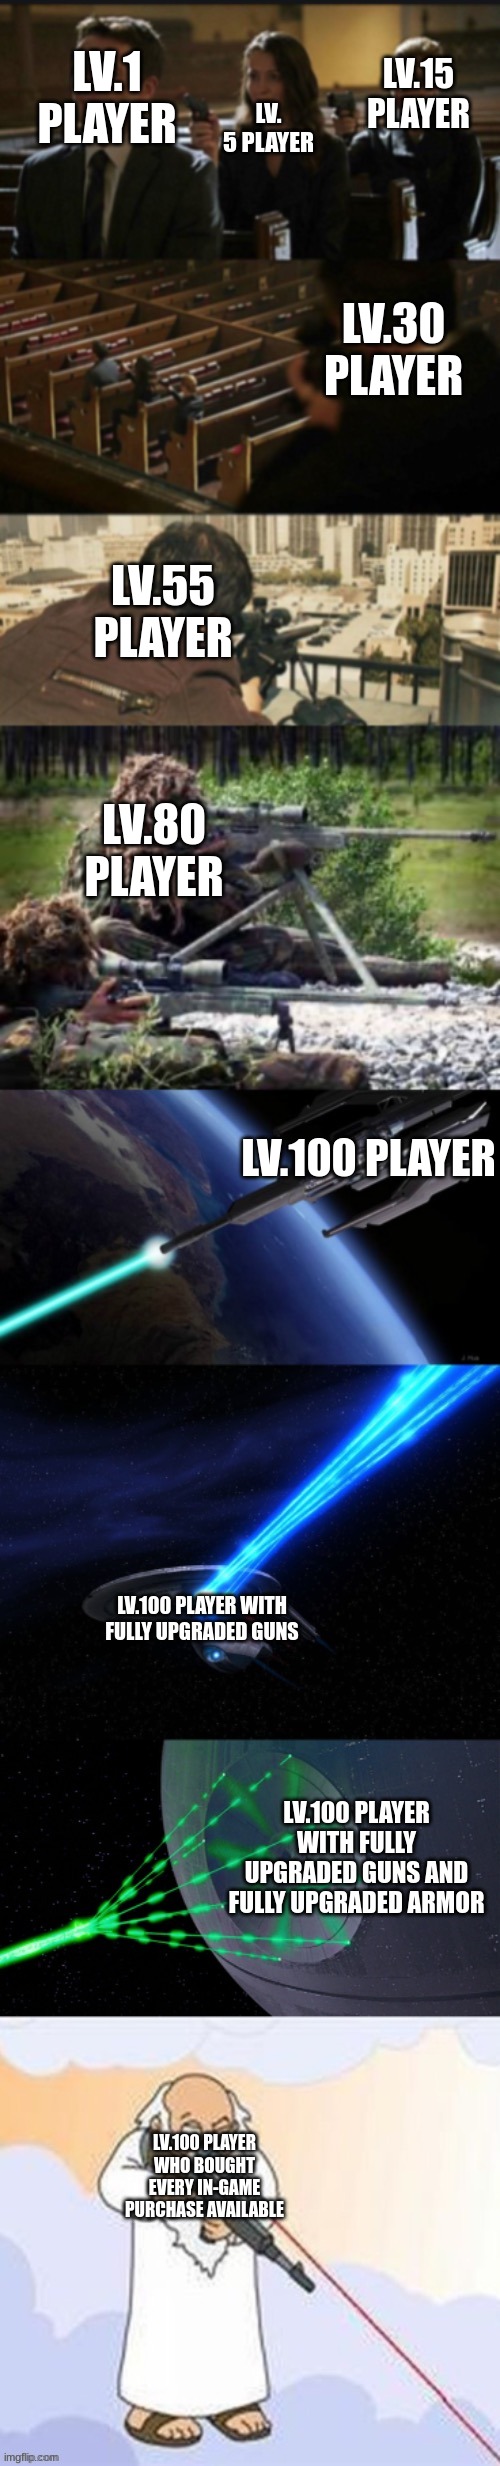 lol | LV.15 PLAYER; LV. 5 PLAYER; LV.1 PLAYER; LV.30 PLAYER; LV.55 PLAYER; LV.80 PLAYER; LV.100 PLAYER; LV.100 PLAYER WITH FULLY UPGRADED GUNS; LV.100 PLAYER WITH FULLY UPGRADED GUNS AND FULLY UPGRADED ARMOR; LV.100 PLAYER WHO BOUGHT EVERY IN-GAME PURCHASE AVAILABLE | image tagged in assassination chain with too many assassins | made w/ Imgflip meme maker